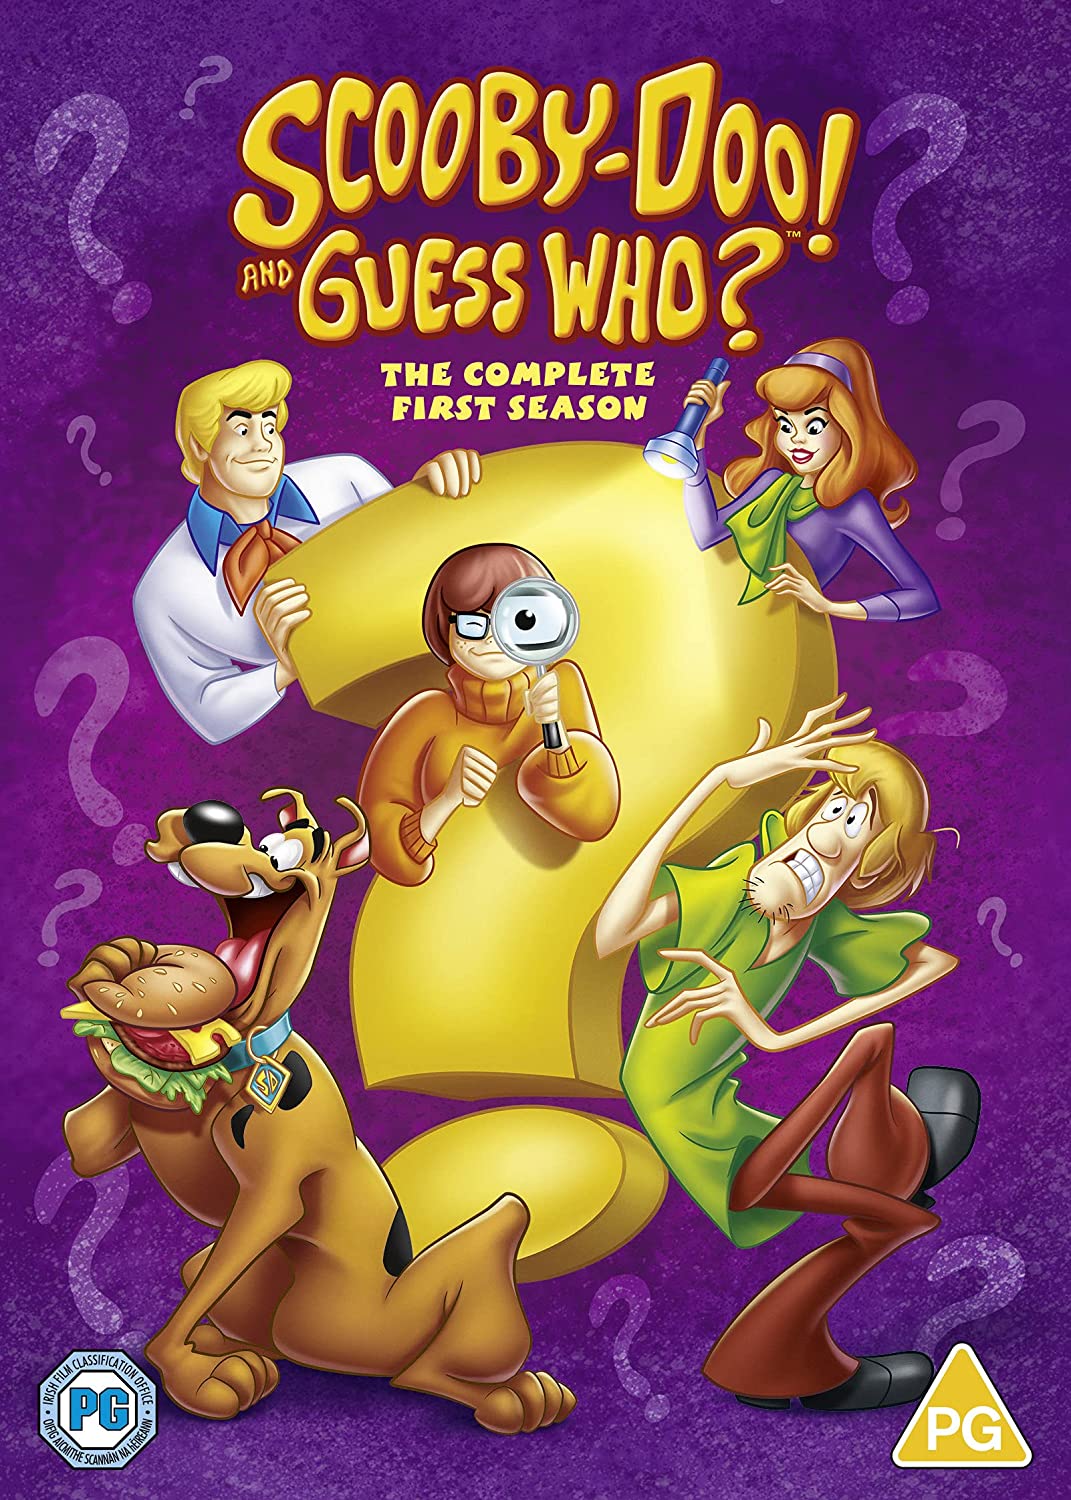 Scooby-Doo! and Guess Who?